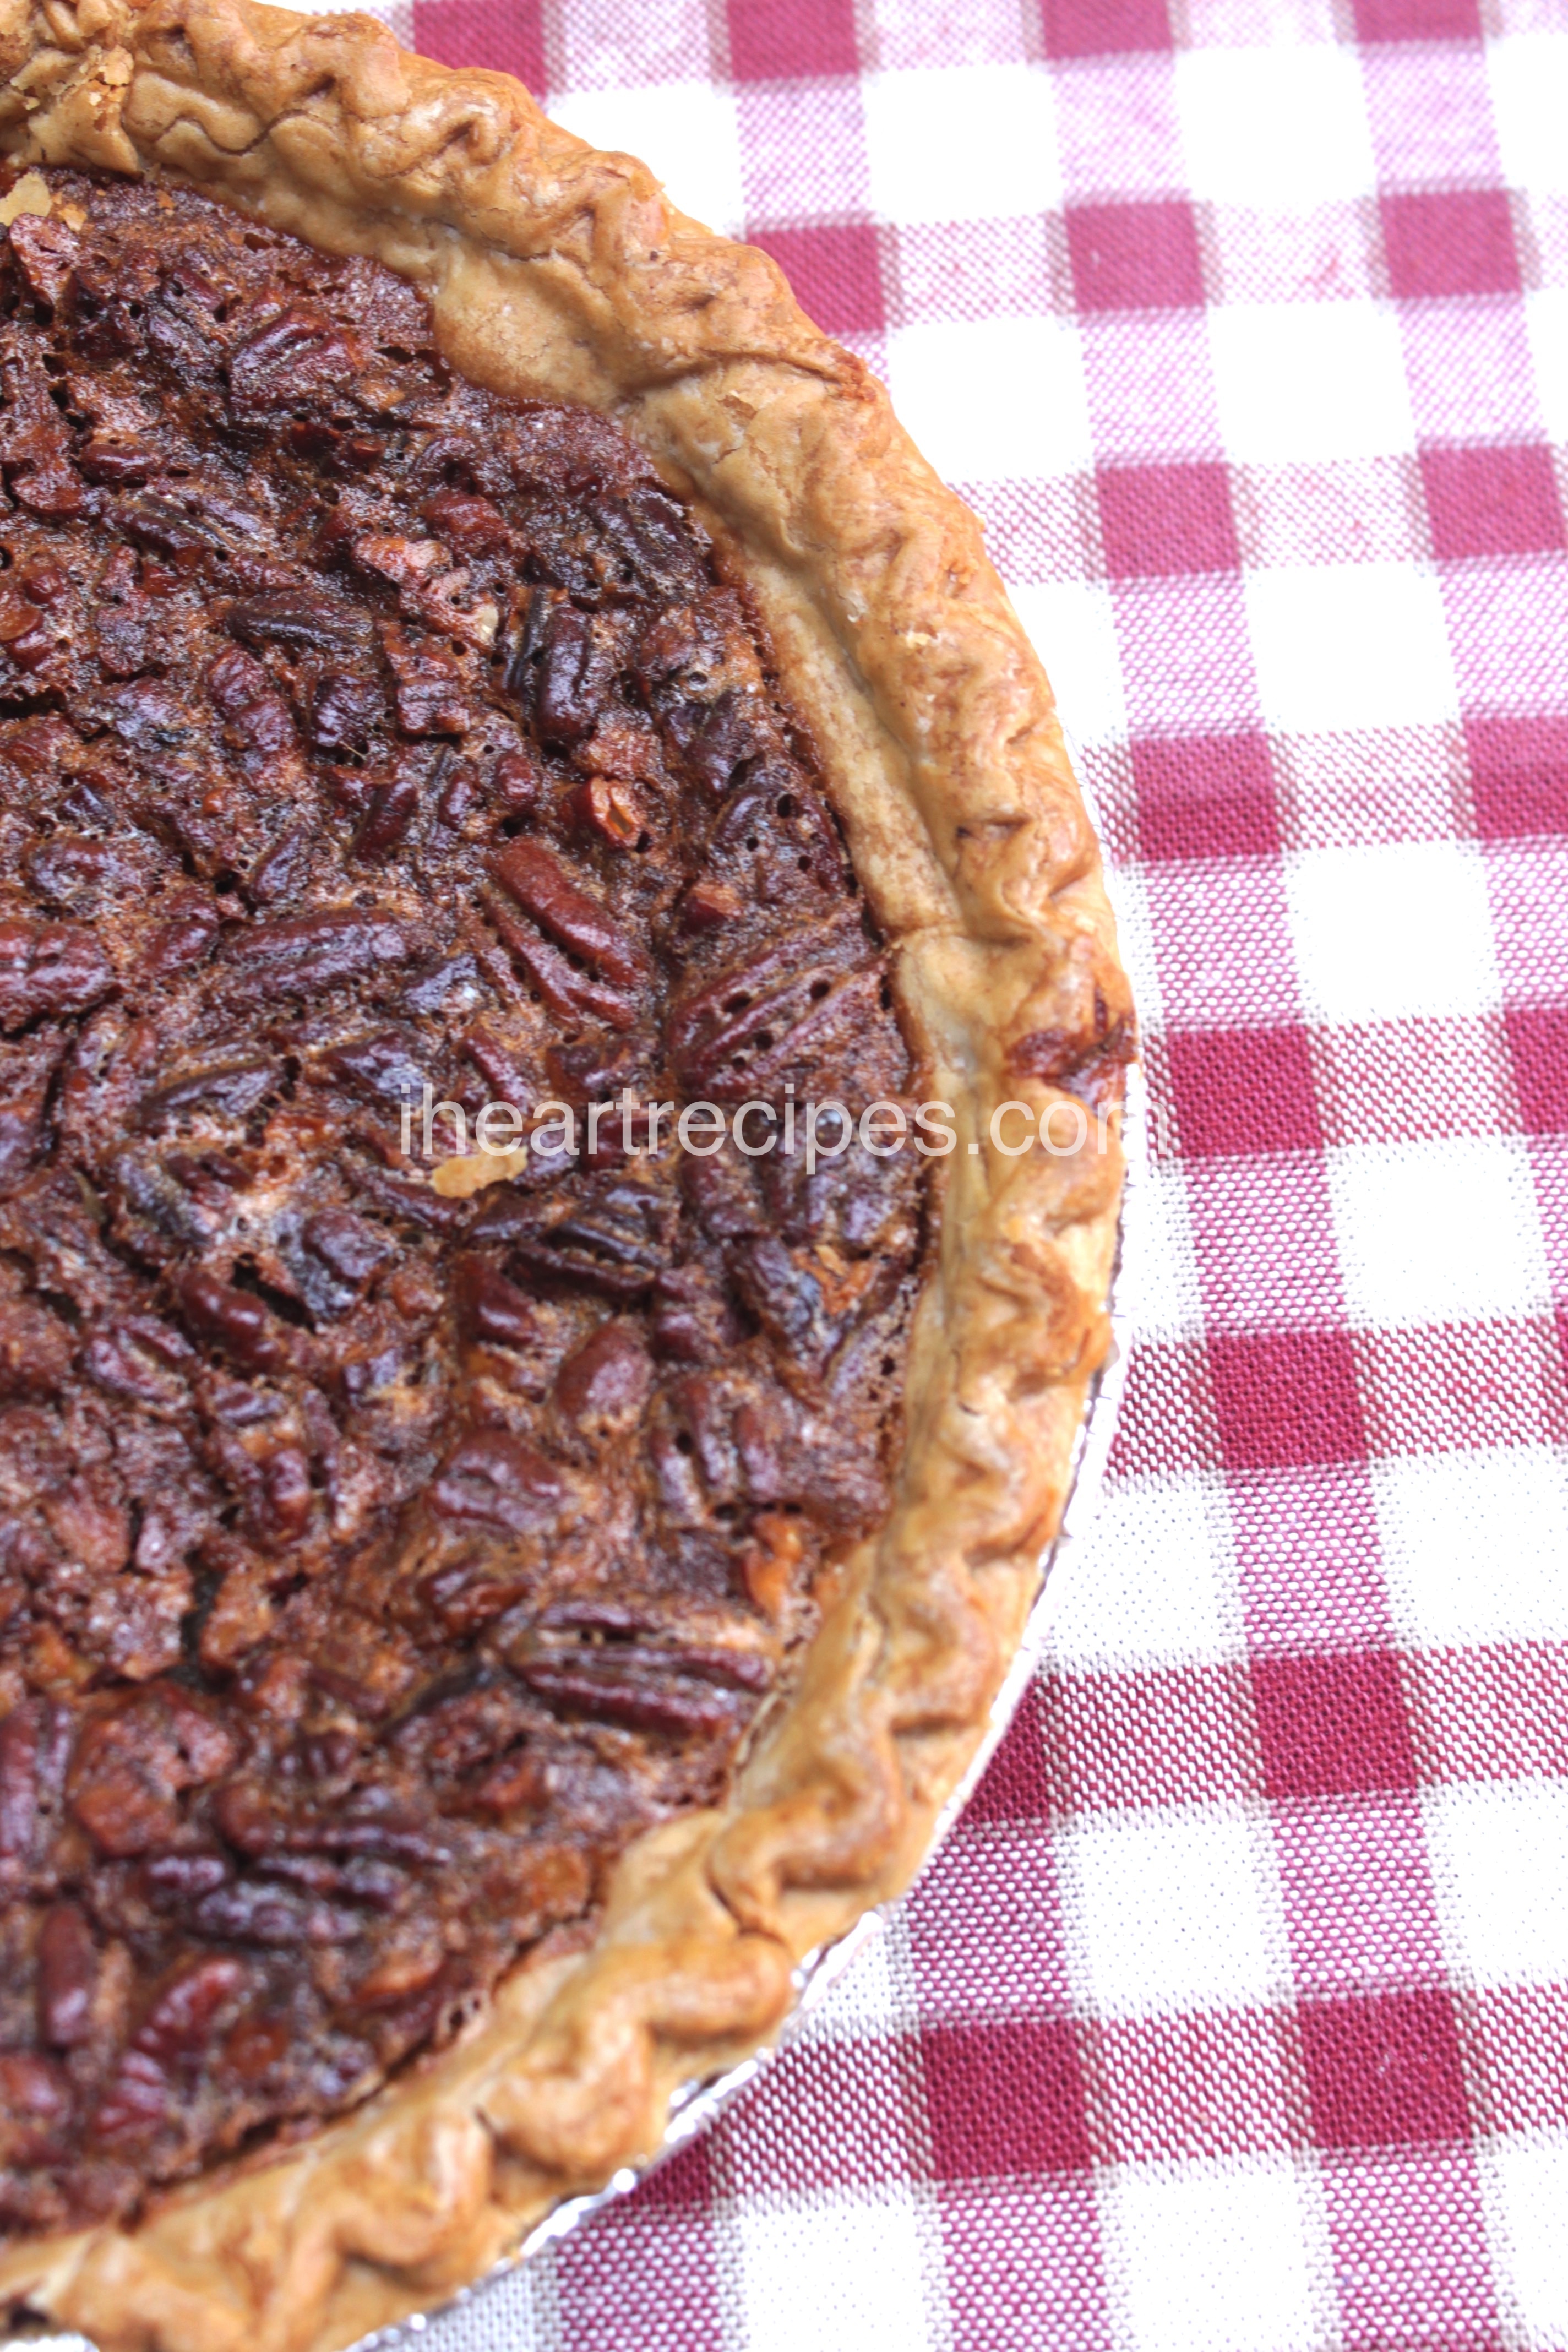 Southern Pecan Pie is a classic holiday dessert!